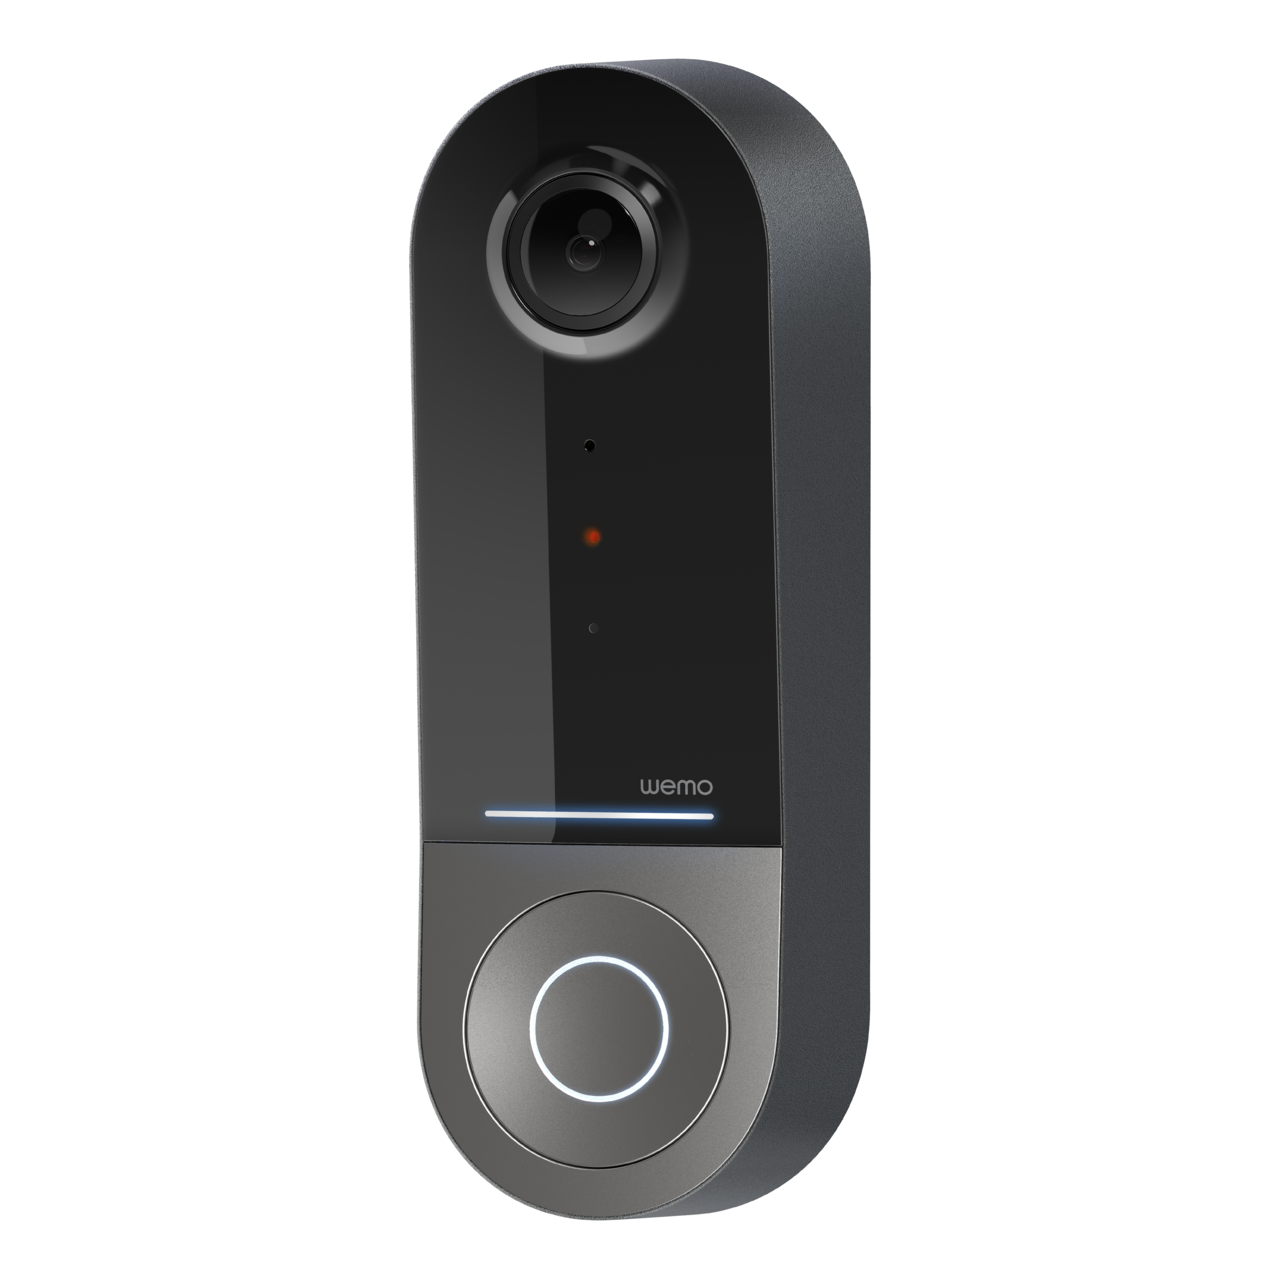 Ring Doorbell Troubleshooting | SafeWise